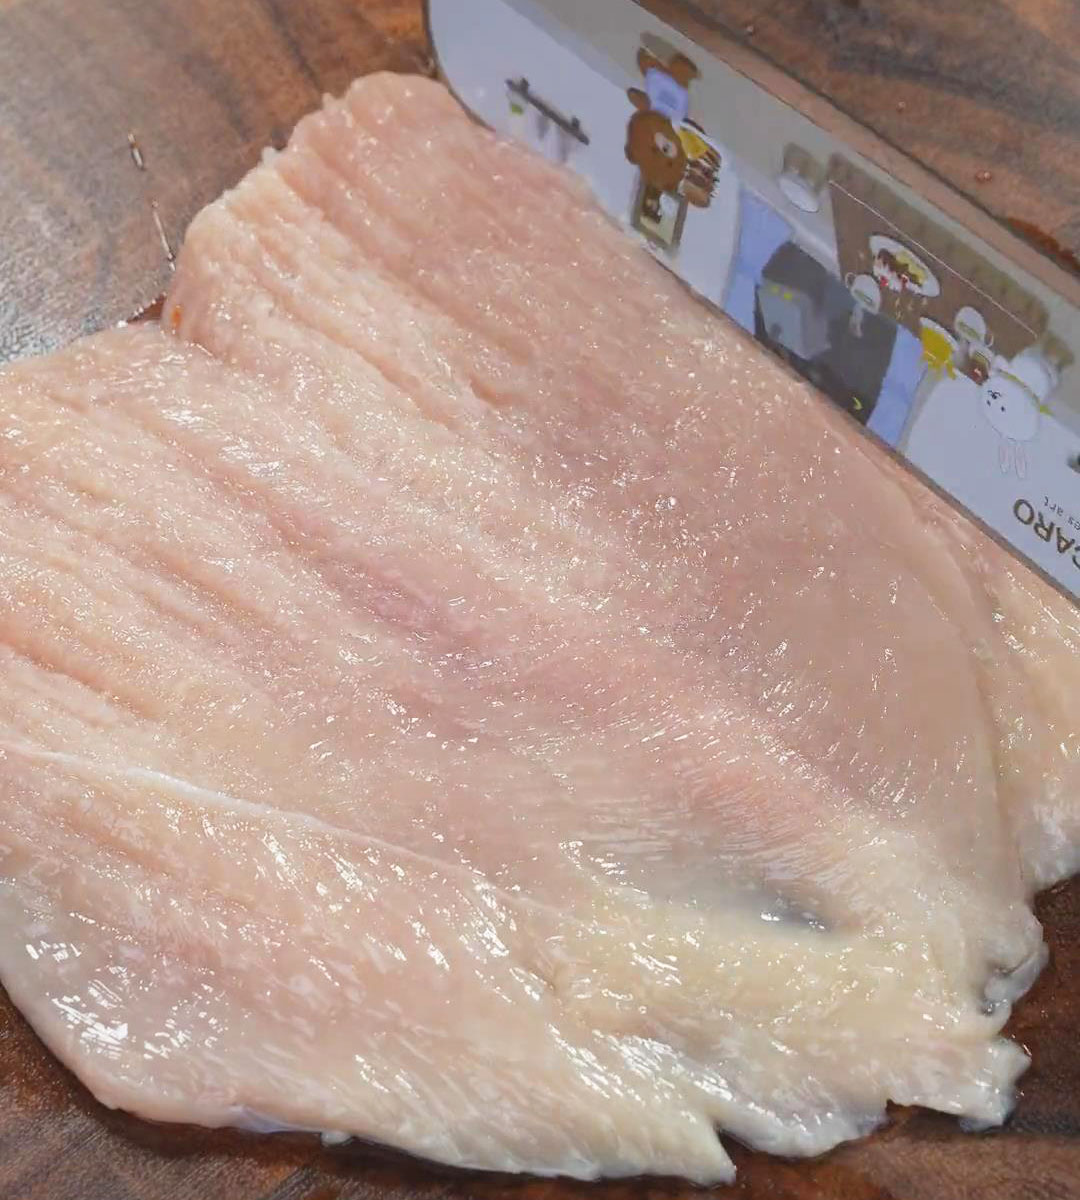 Tenderize the chicken breast using the back of the knife